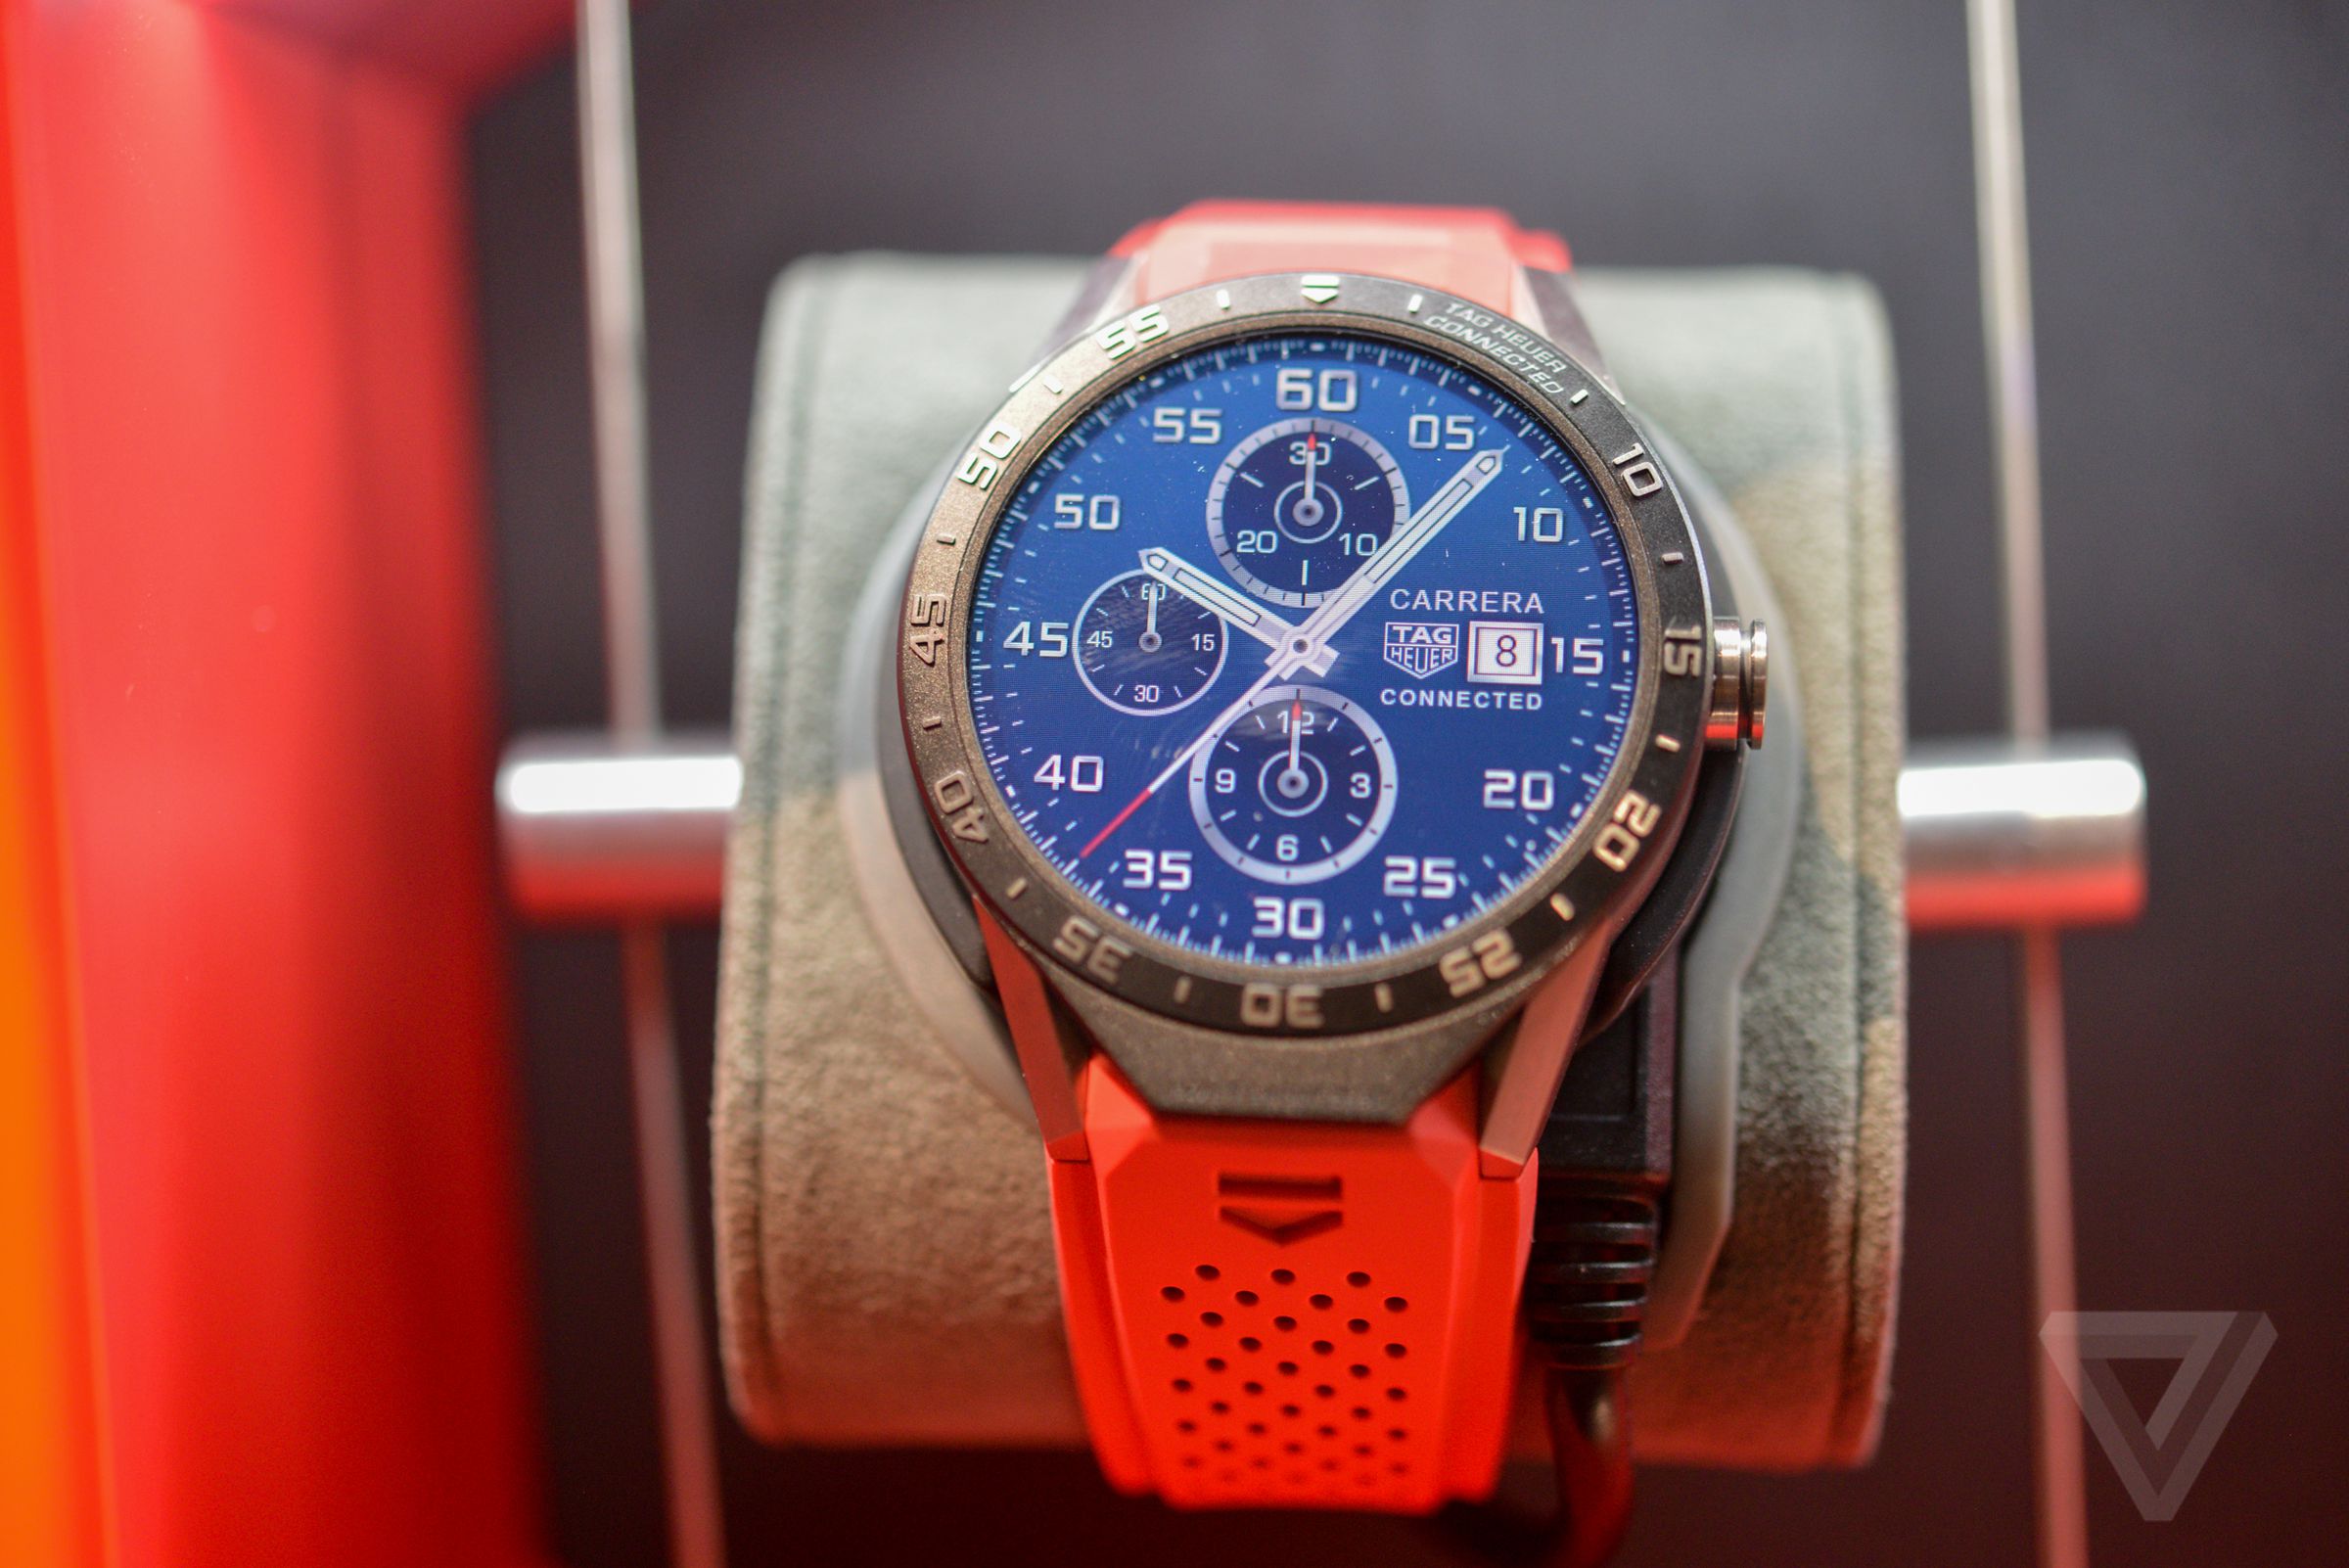 Tag Heuer Carrera connected watch hands-on photos